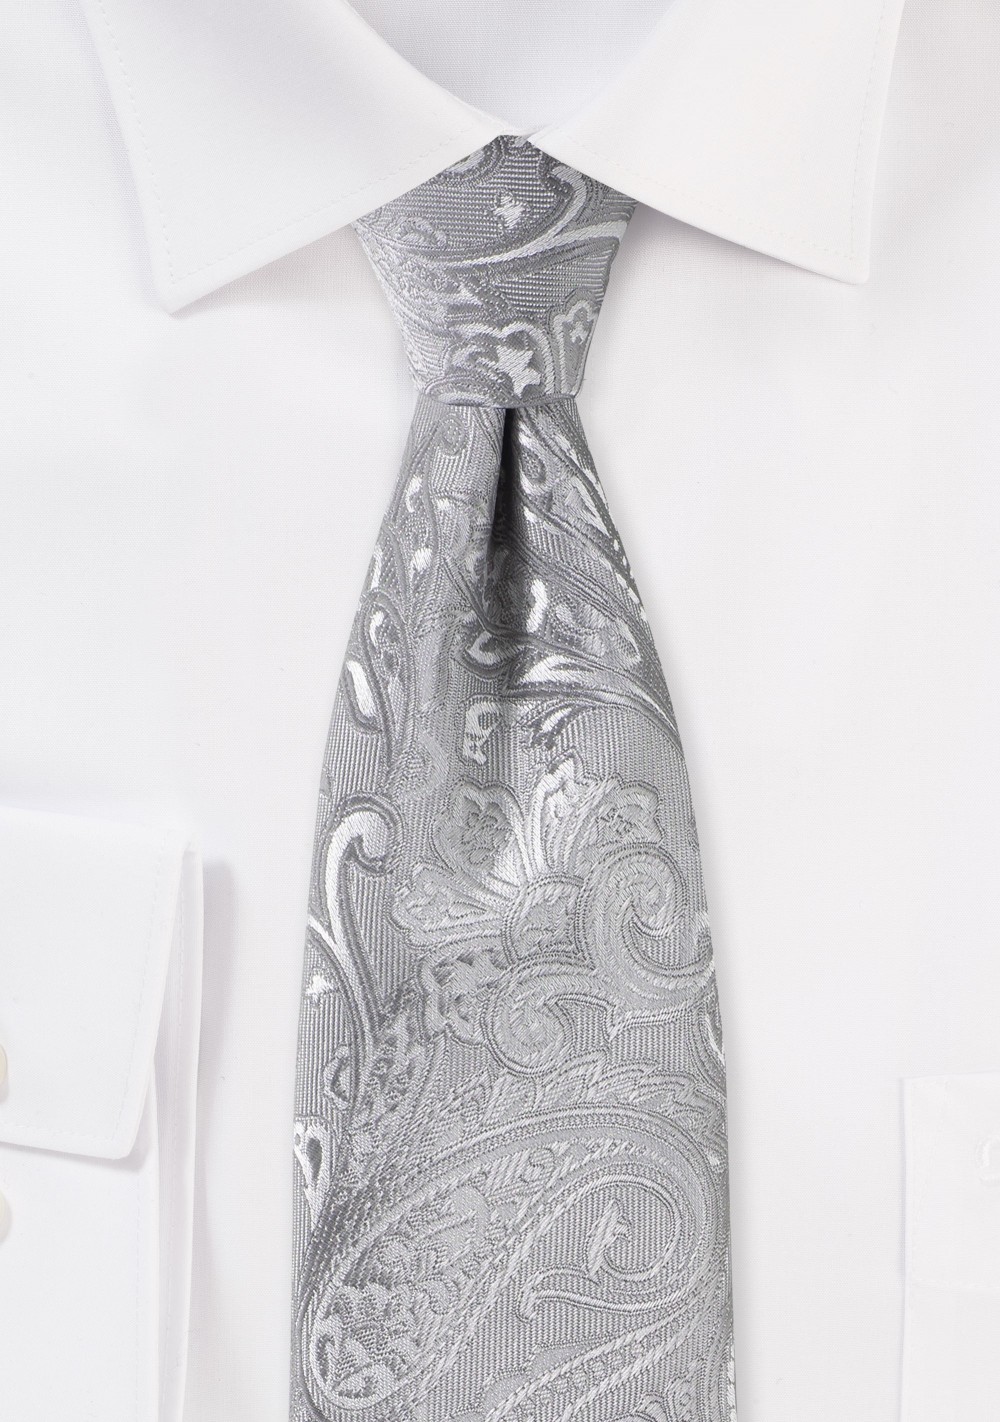 Woven Formal Paisley Tie in Silver